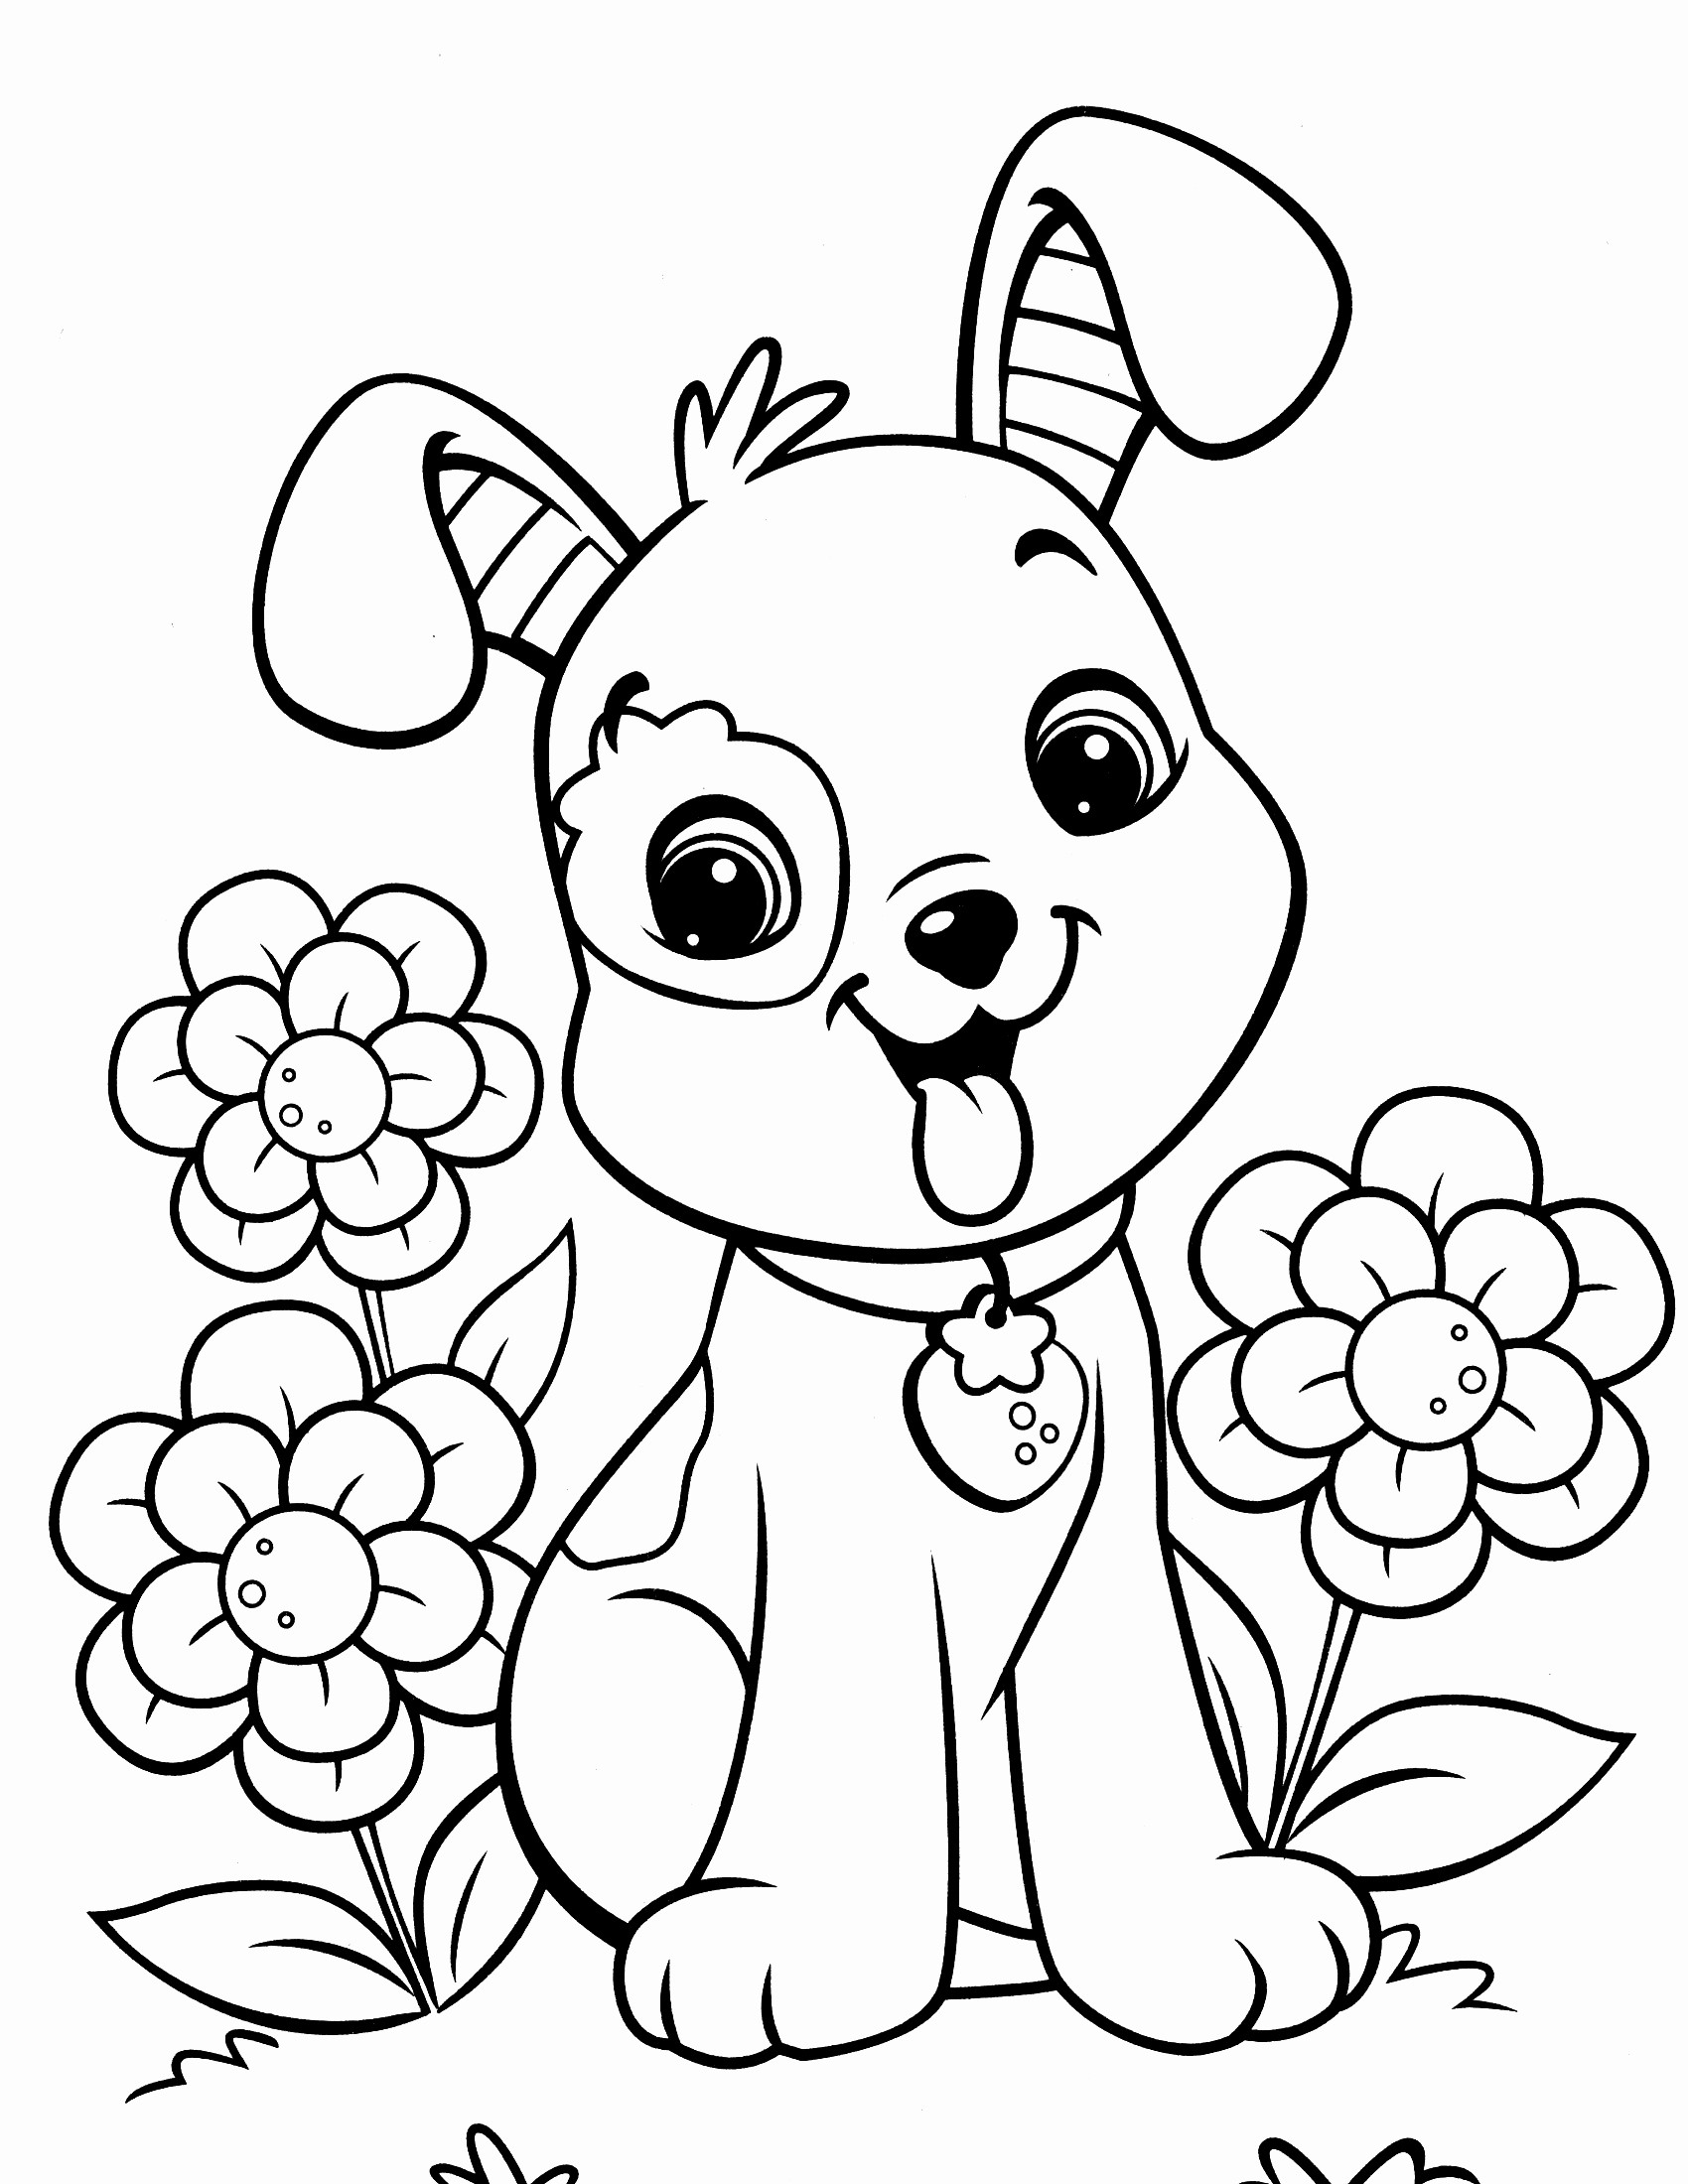 Pets Coloring Pages   Best Coloring Pages For Kids